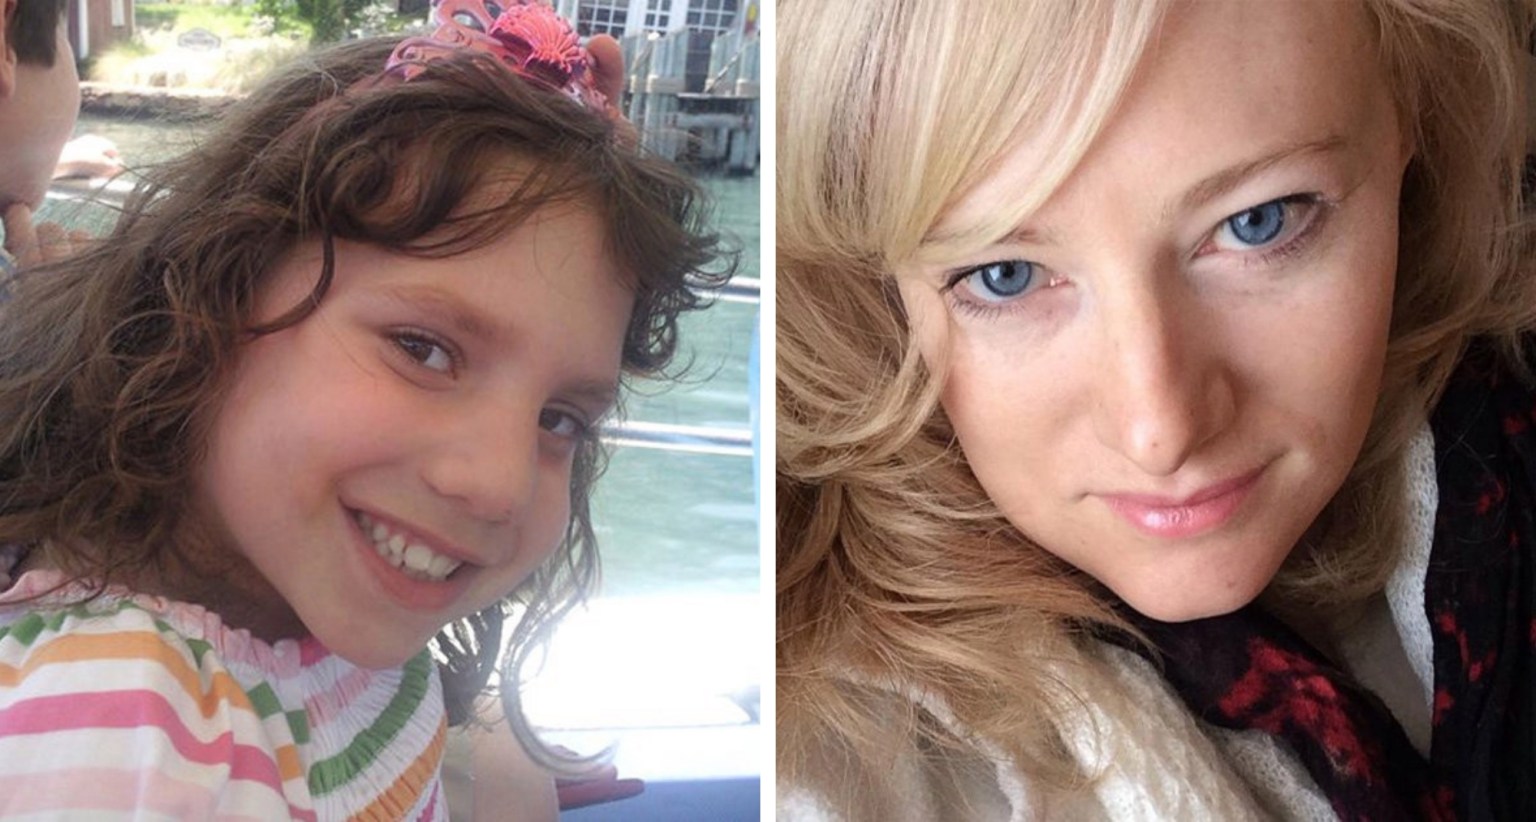 Mum Adopted Ukrainian Girl 9 Only To Discover She Was Actually 22 And A Sociopath Who Tried To